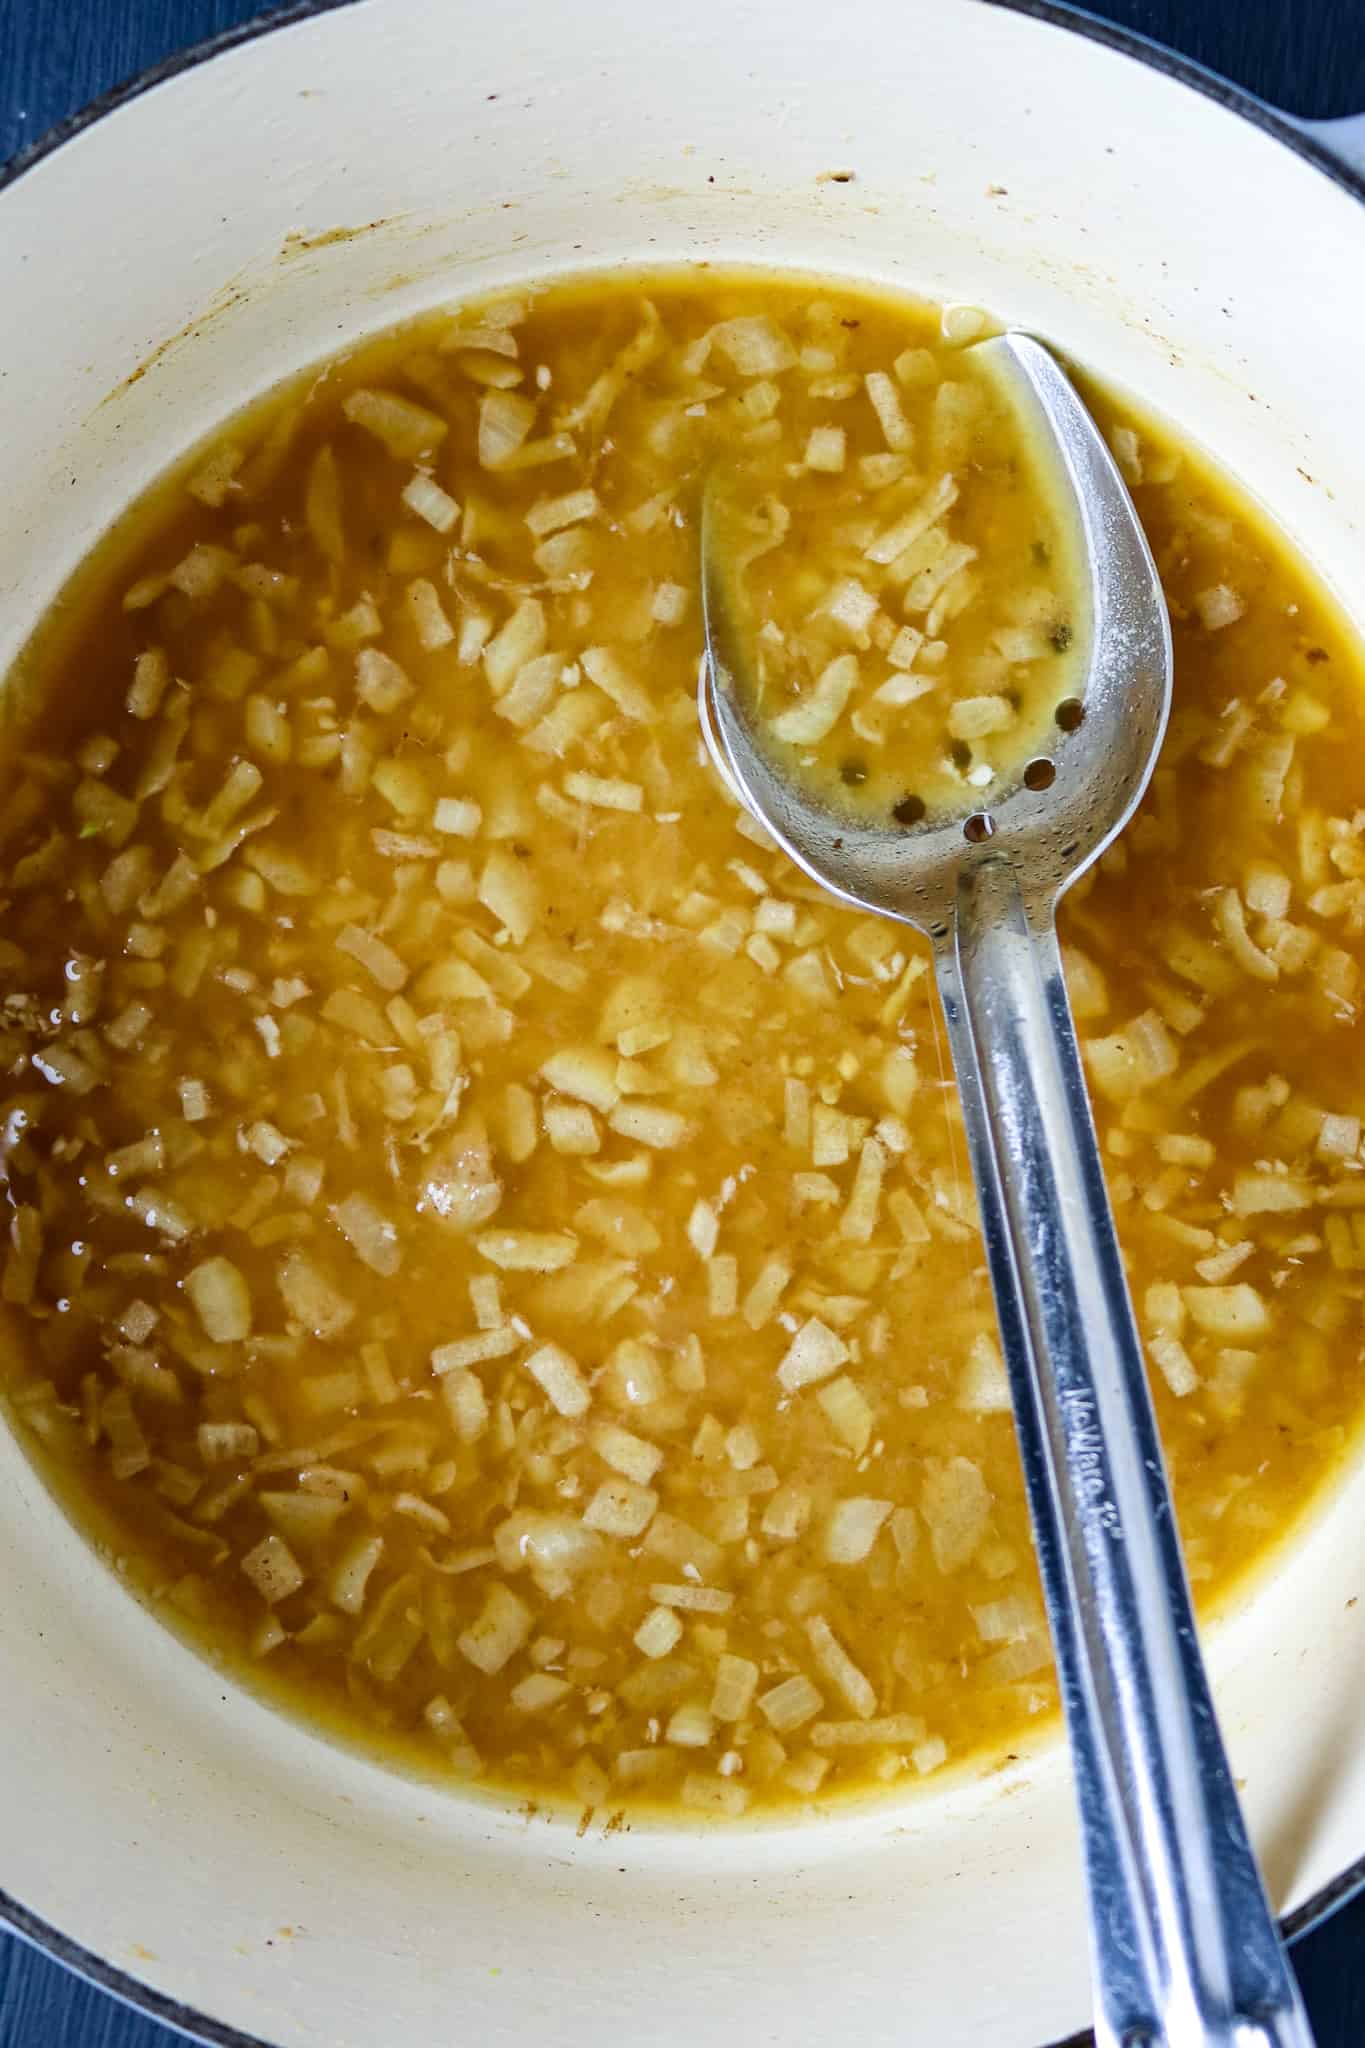 Spoon stirring a pot of broth with cooked onions.